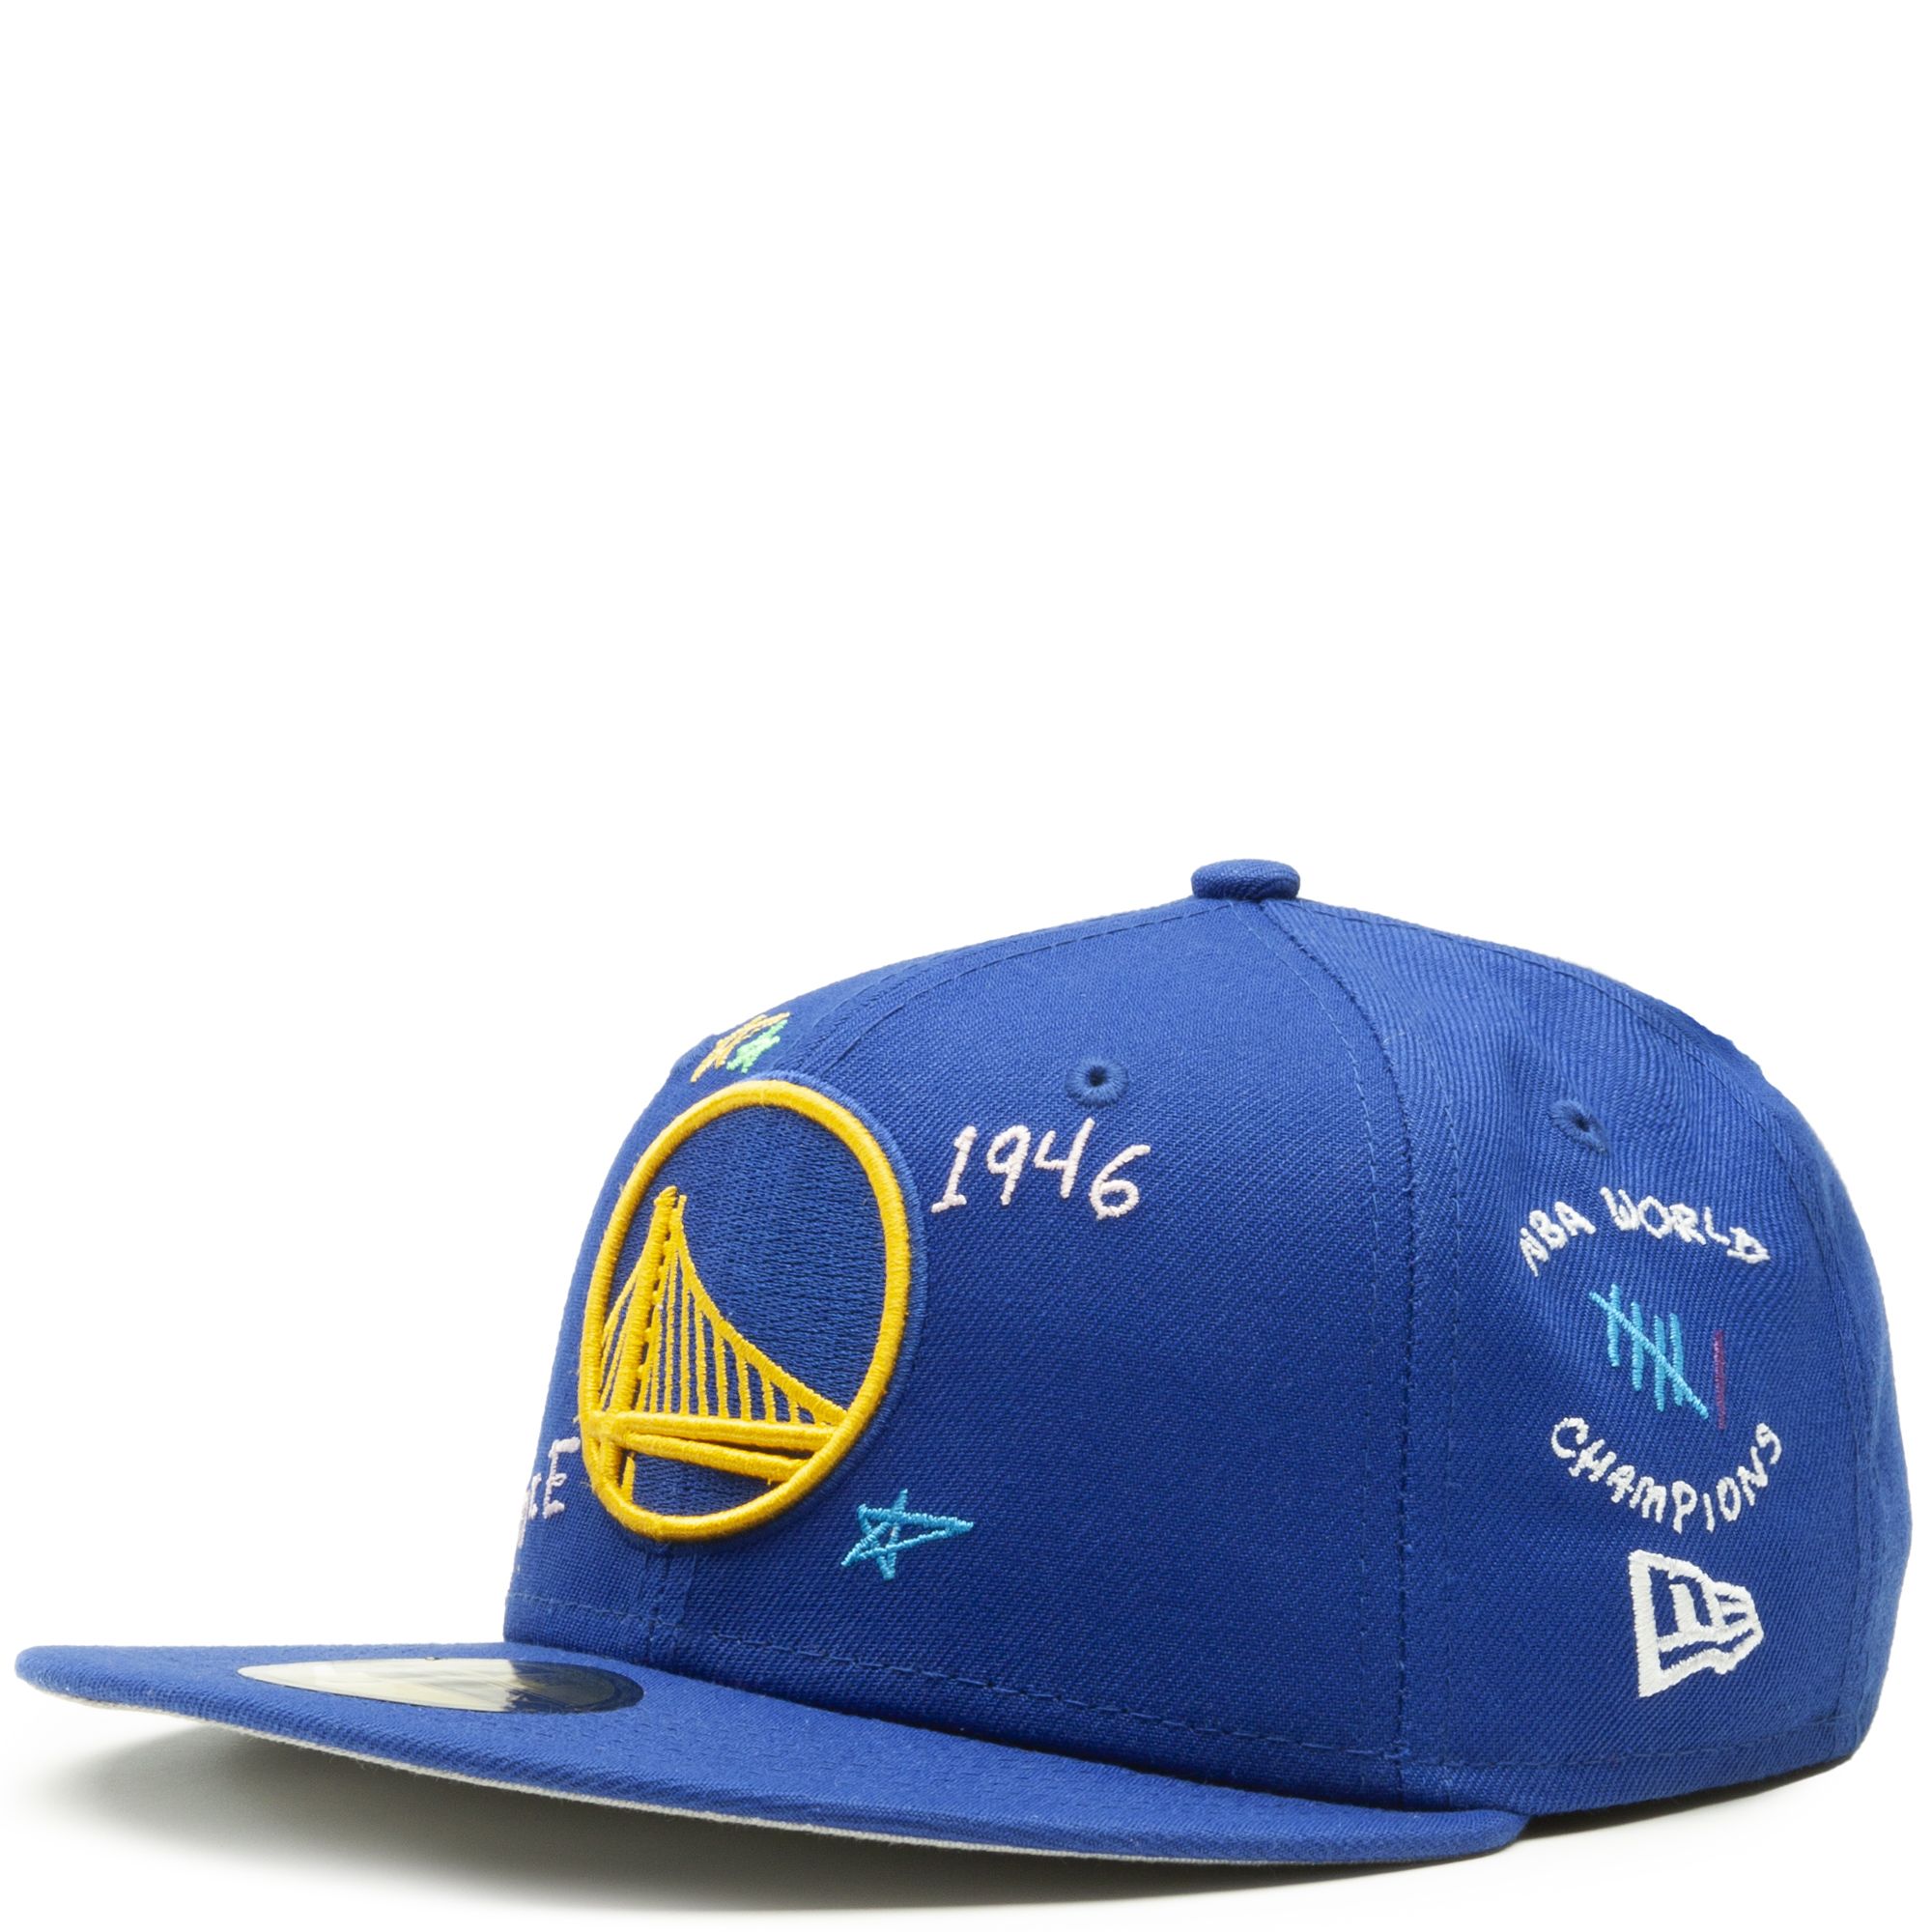 New Era x BC 59FIFTY Golden State Warriors Jersey Logo Dark Royal Blue Red White Fitted Hat